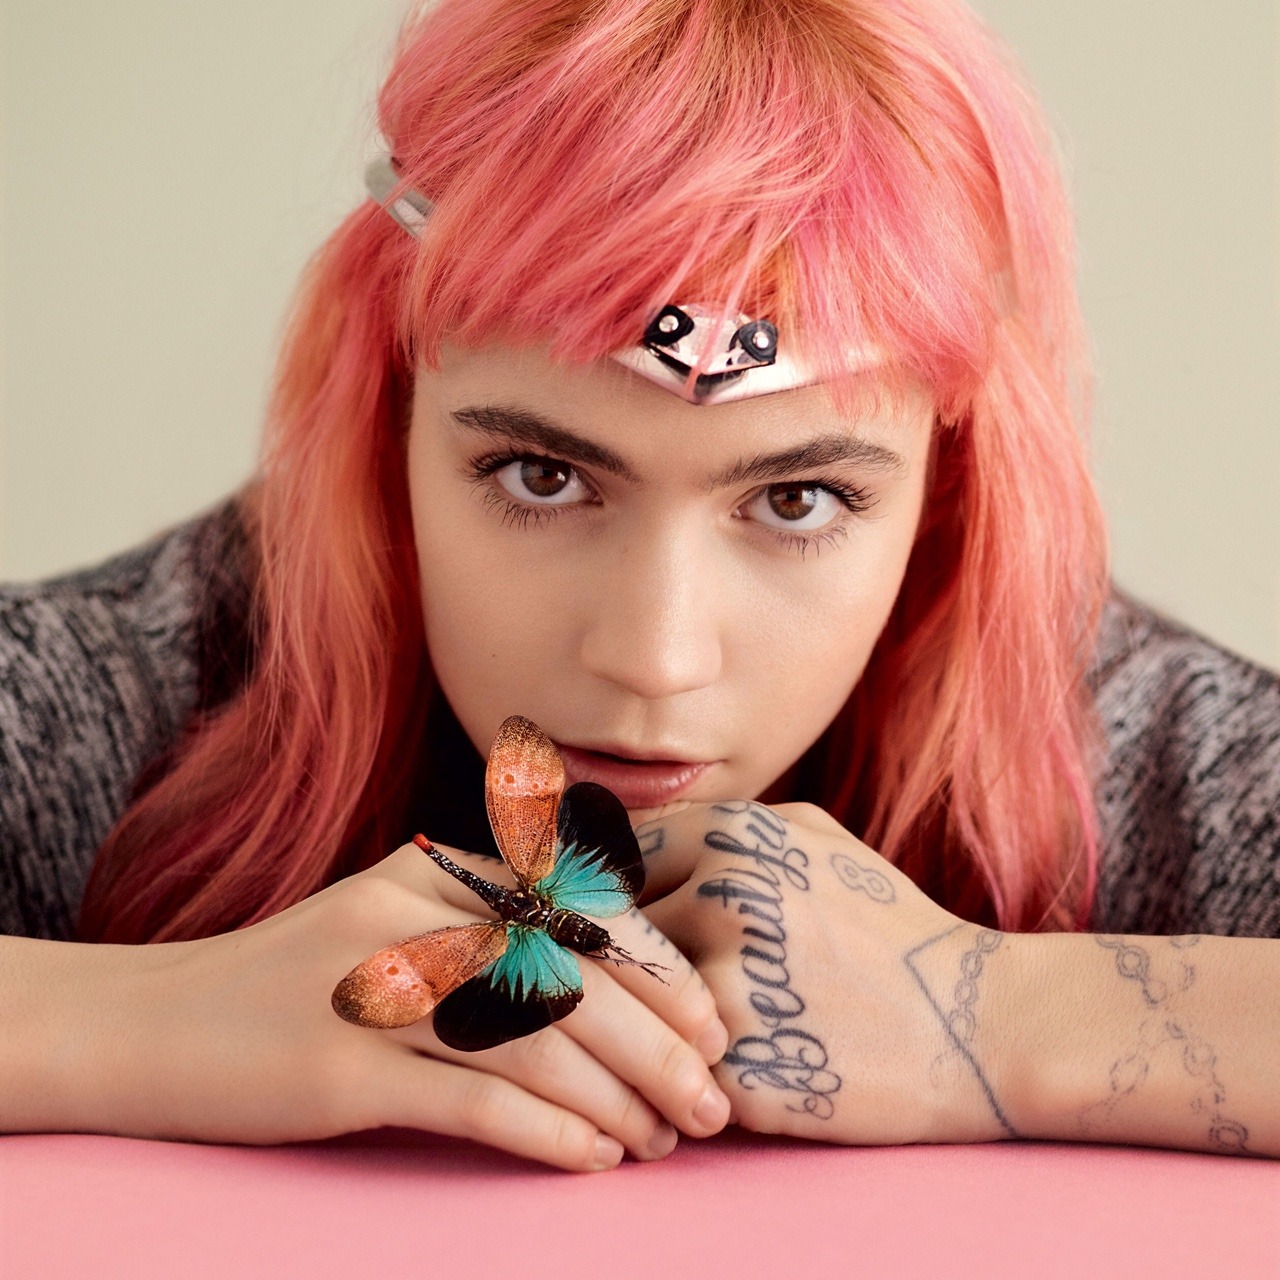 harder-than-you-think:  Grimes aka Claire Boucher for Teen Vogue, 2016. Photos by